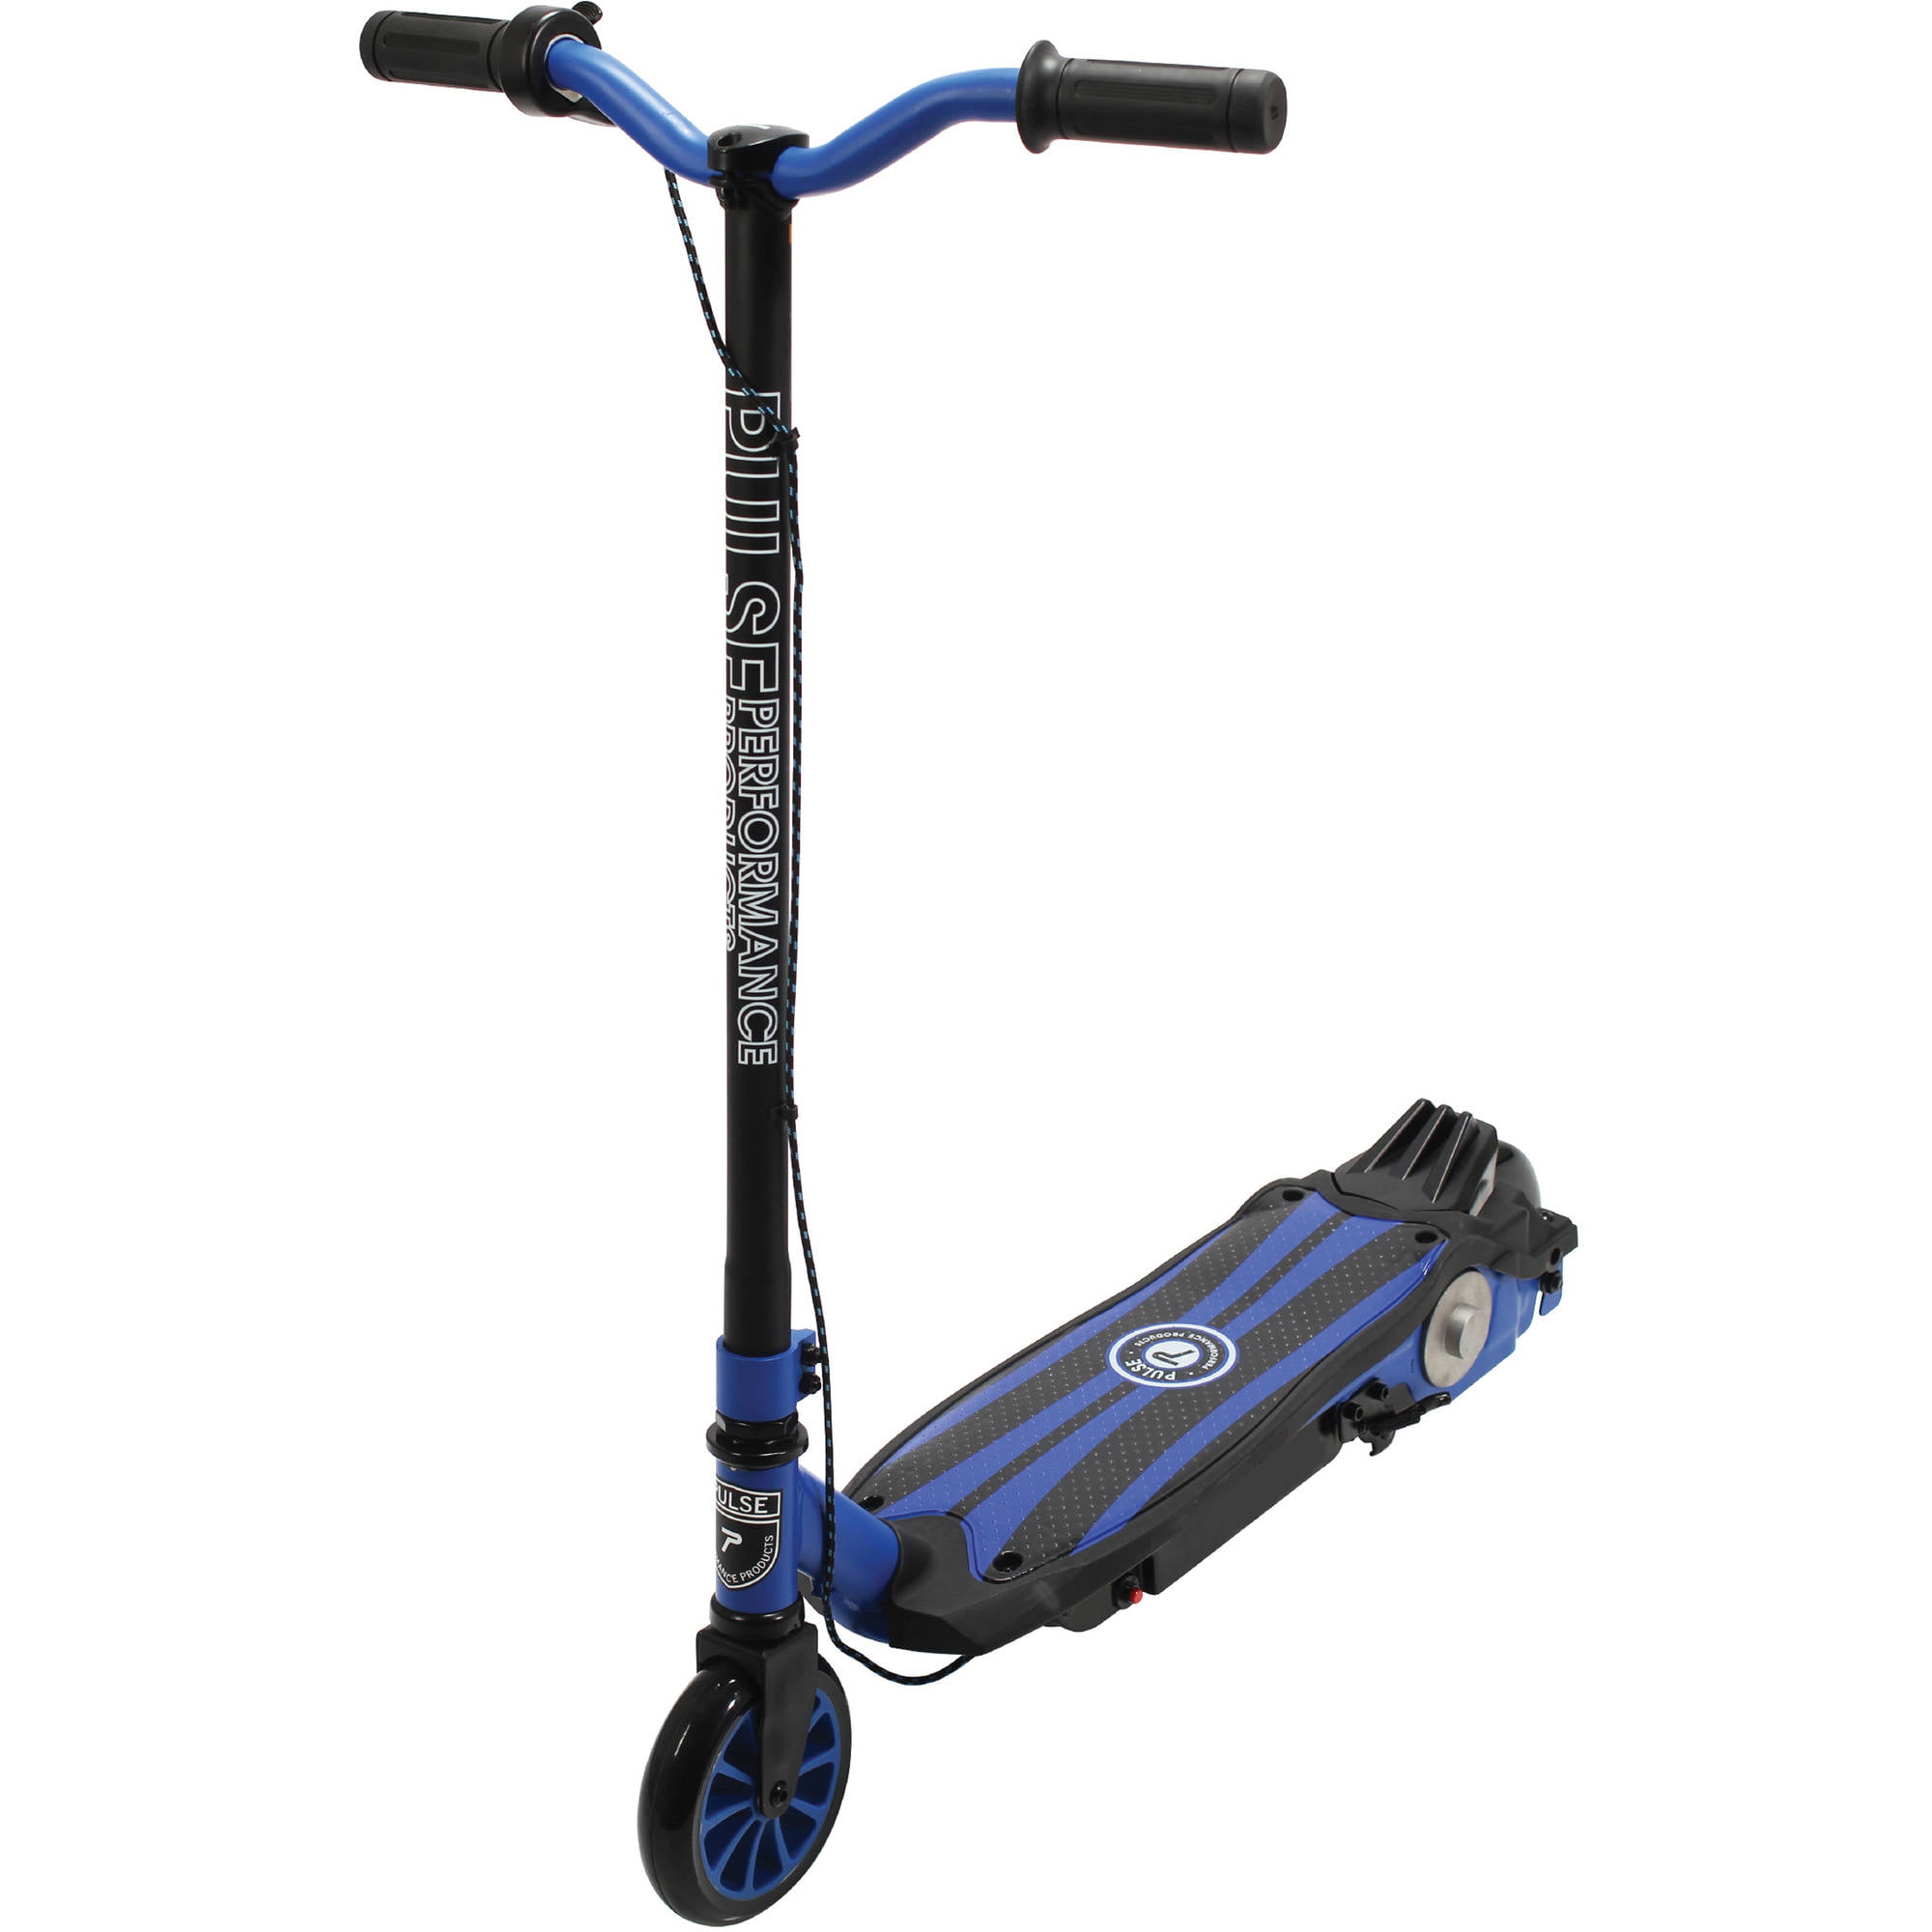 Pulse Performance Products Revster Electric Scooter - Walmart.com ...